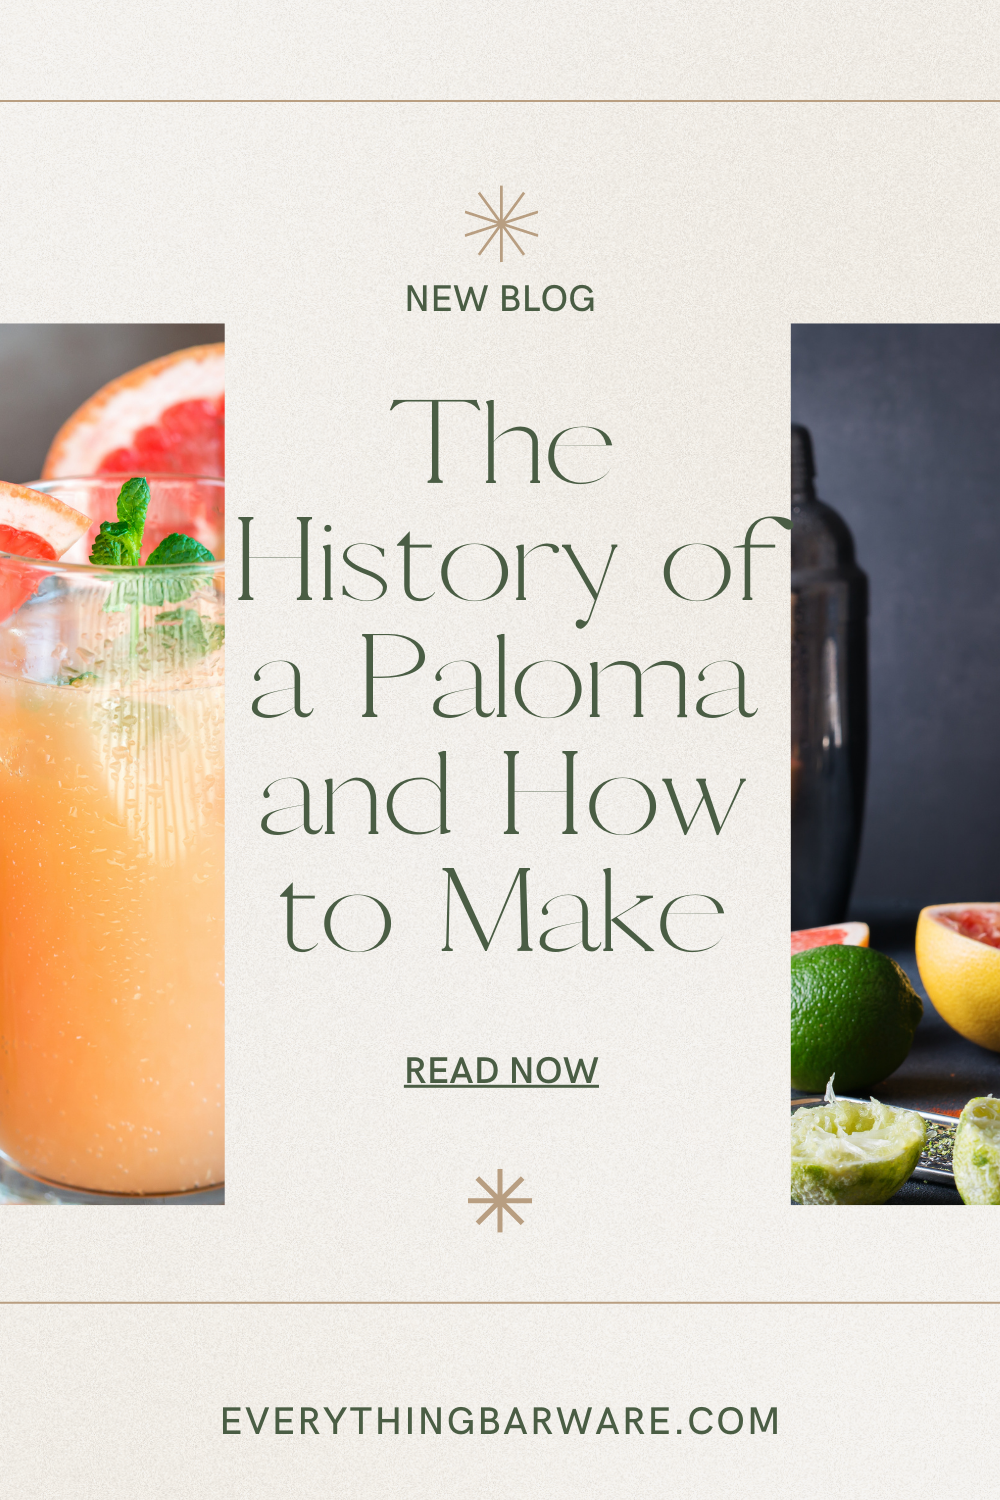 The History of the Paloma and How to Make One